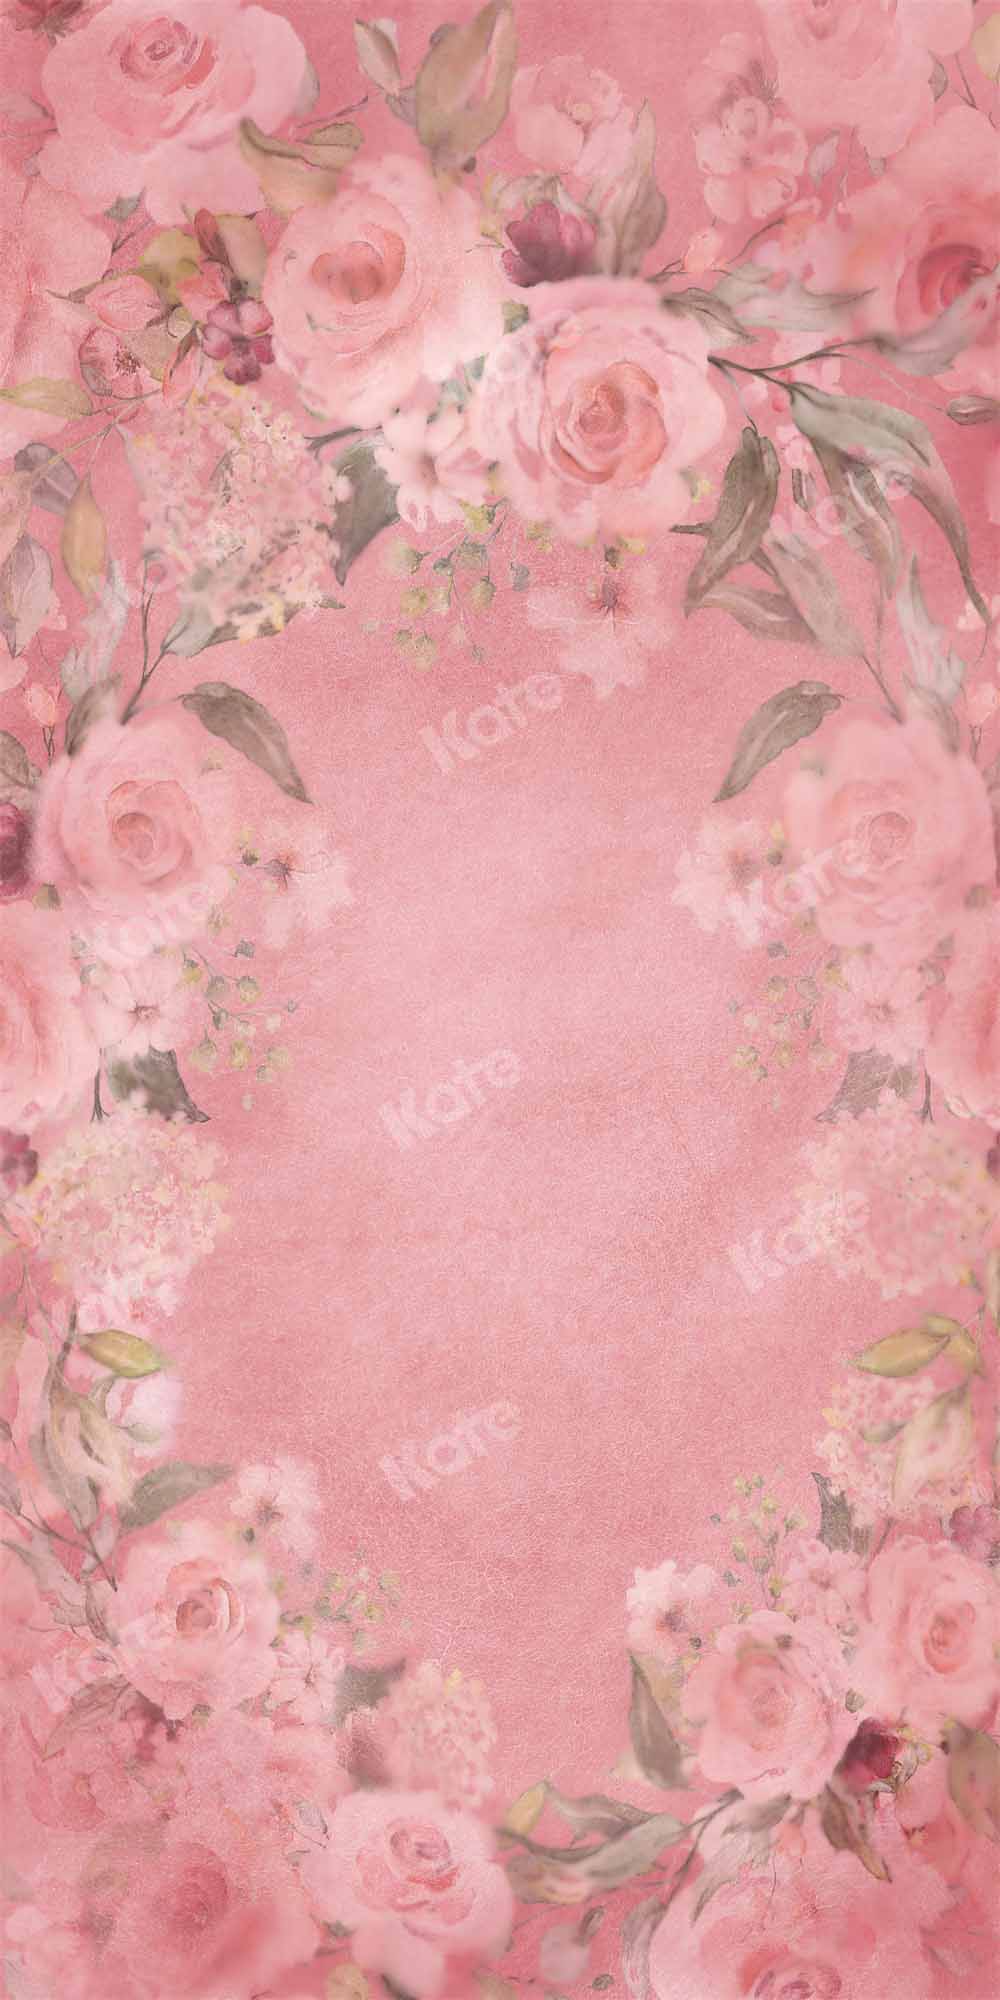 Canvas Of Rose Rhinestones. Background Stock Photo, Picture and